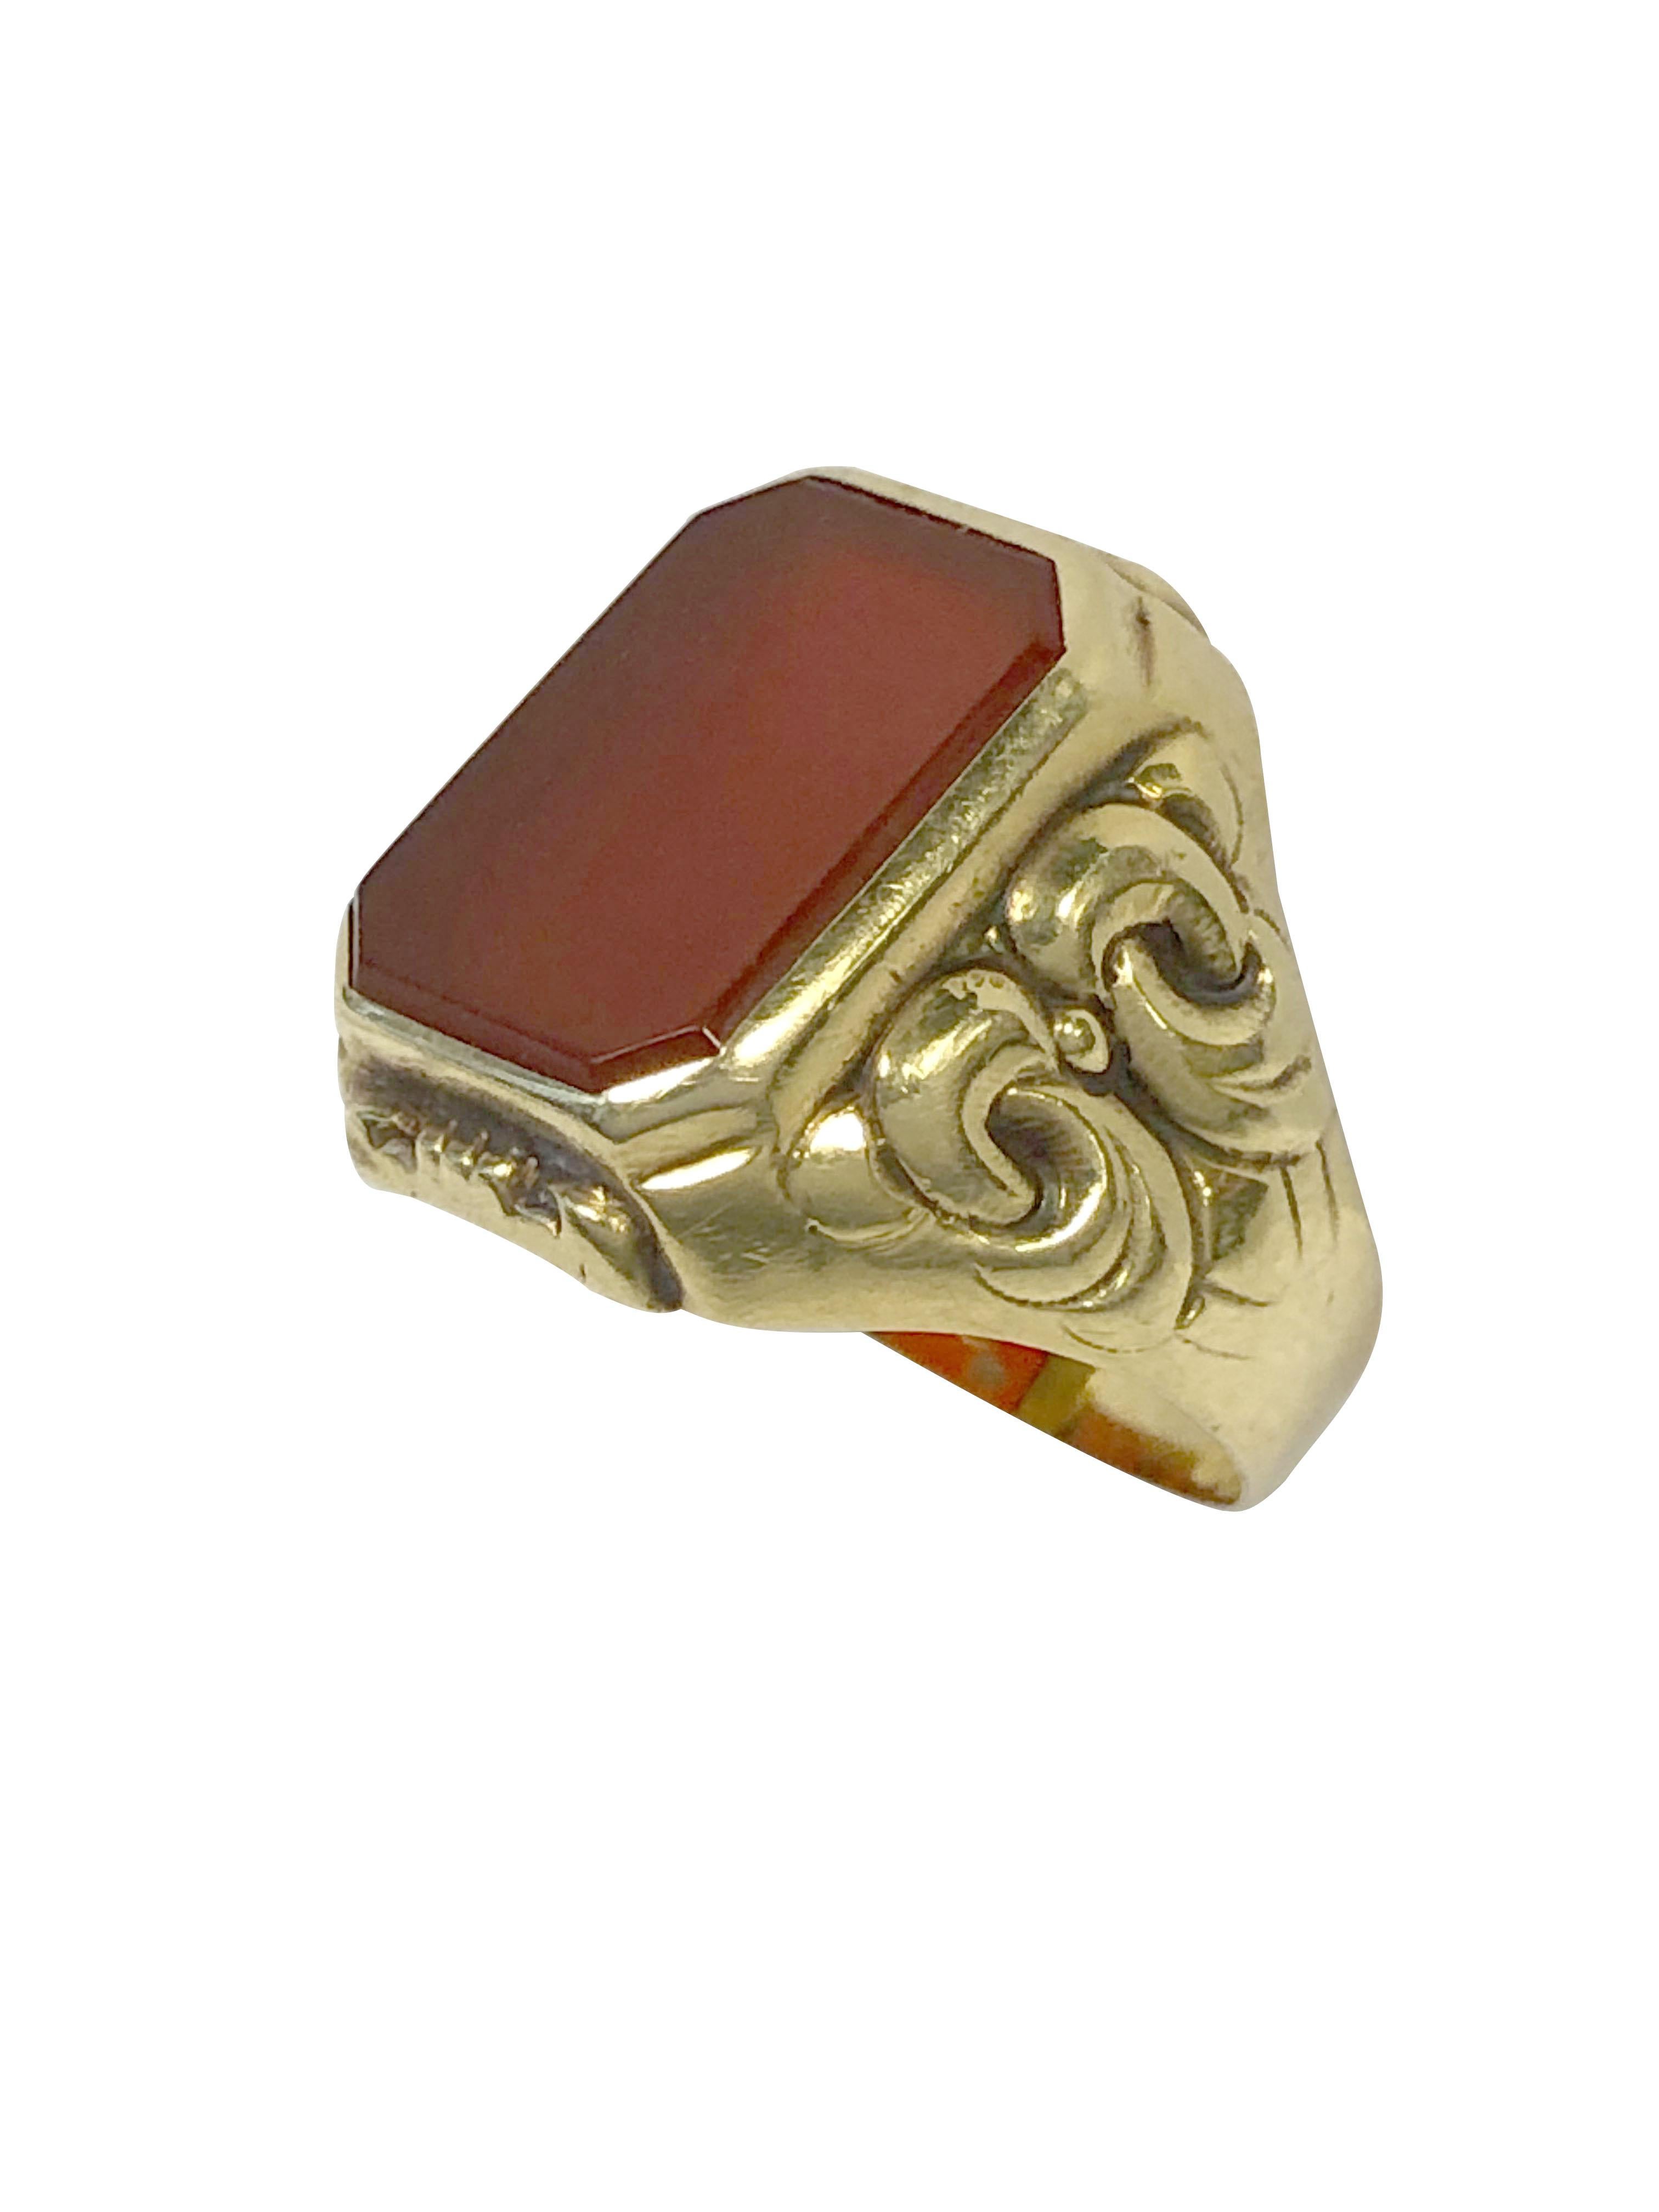 Women's or Men's Antique Gold and Carnelian Edwardian Signet Ring 